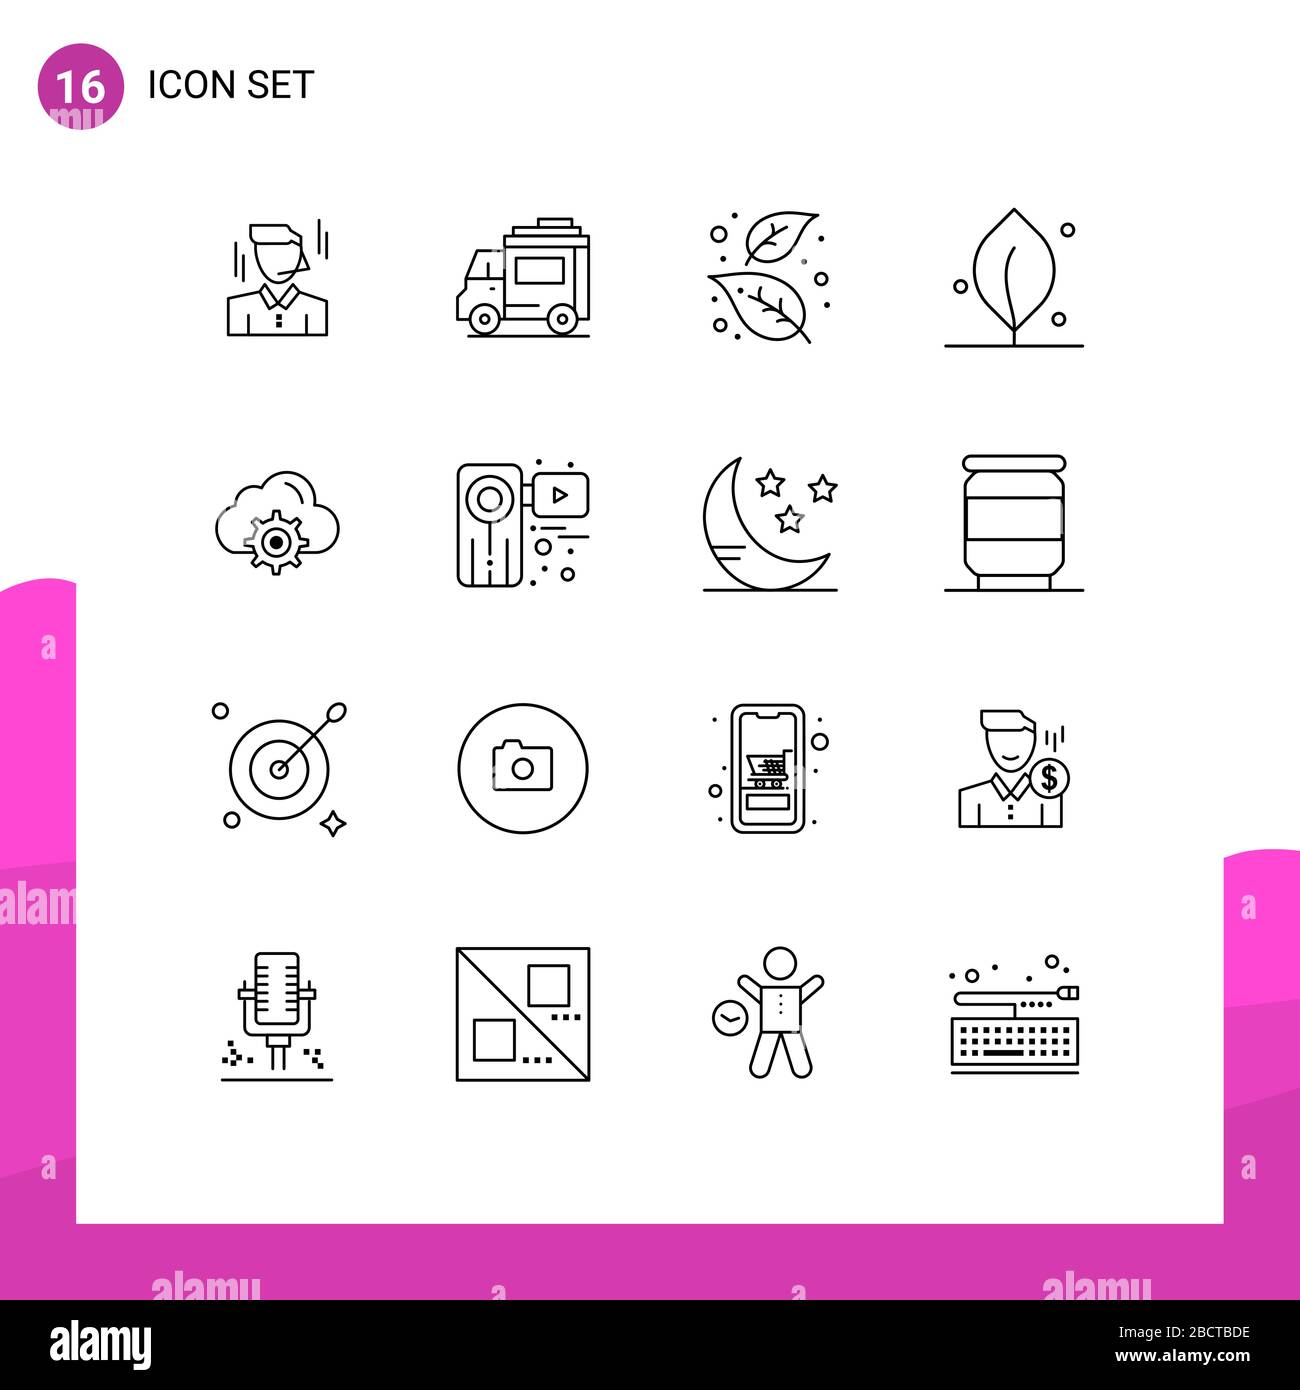 Set of 16 Modern UI Icons Symbols Signs for setting, nature, ash, leaf, tree Editable Vector Design Elements Stock Vector